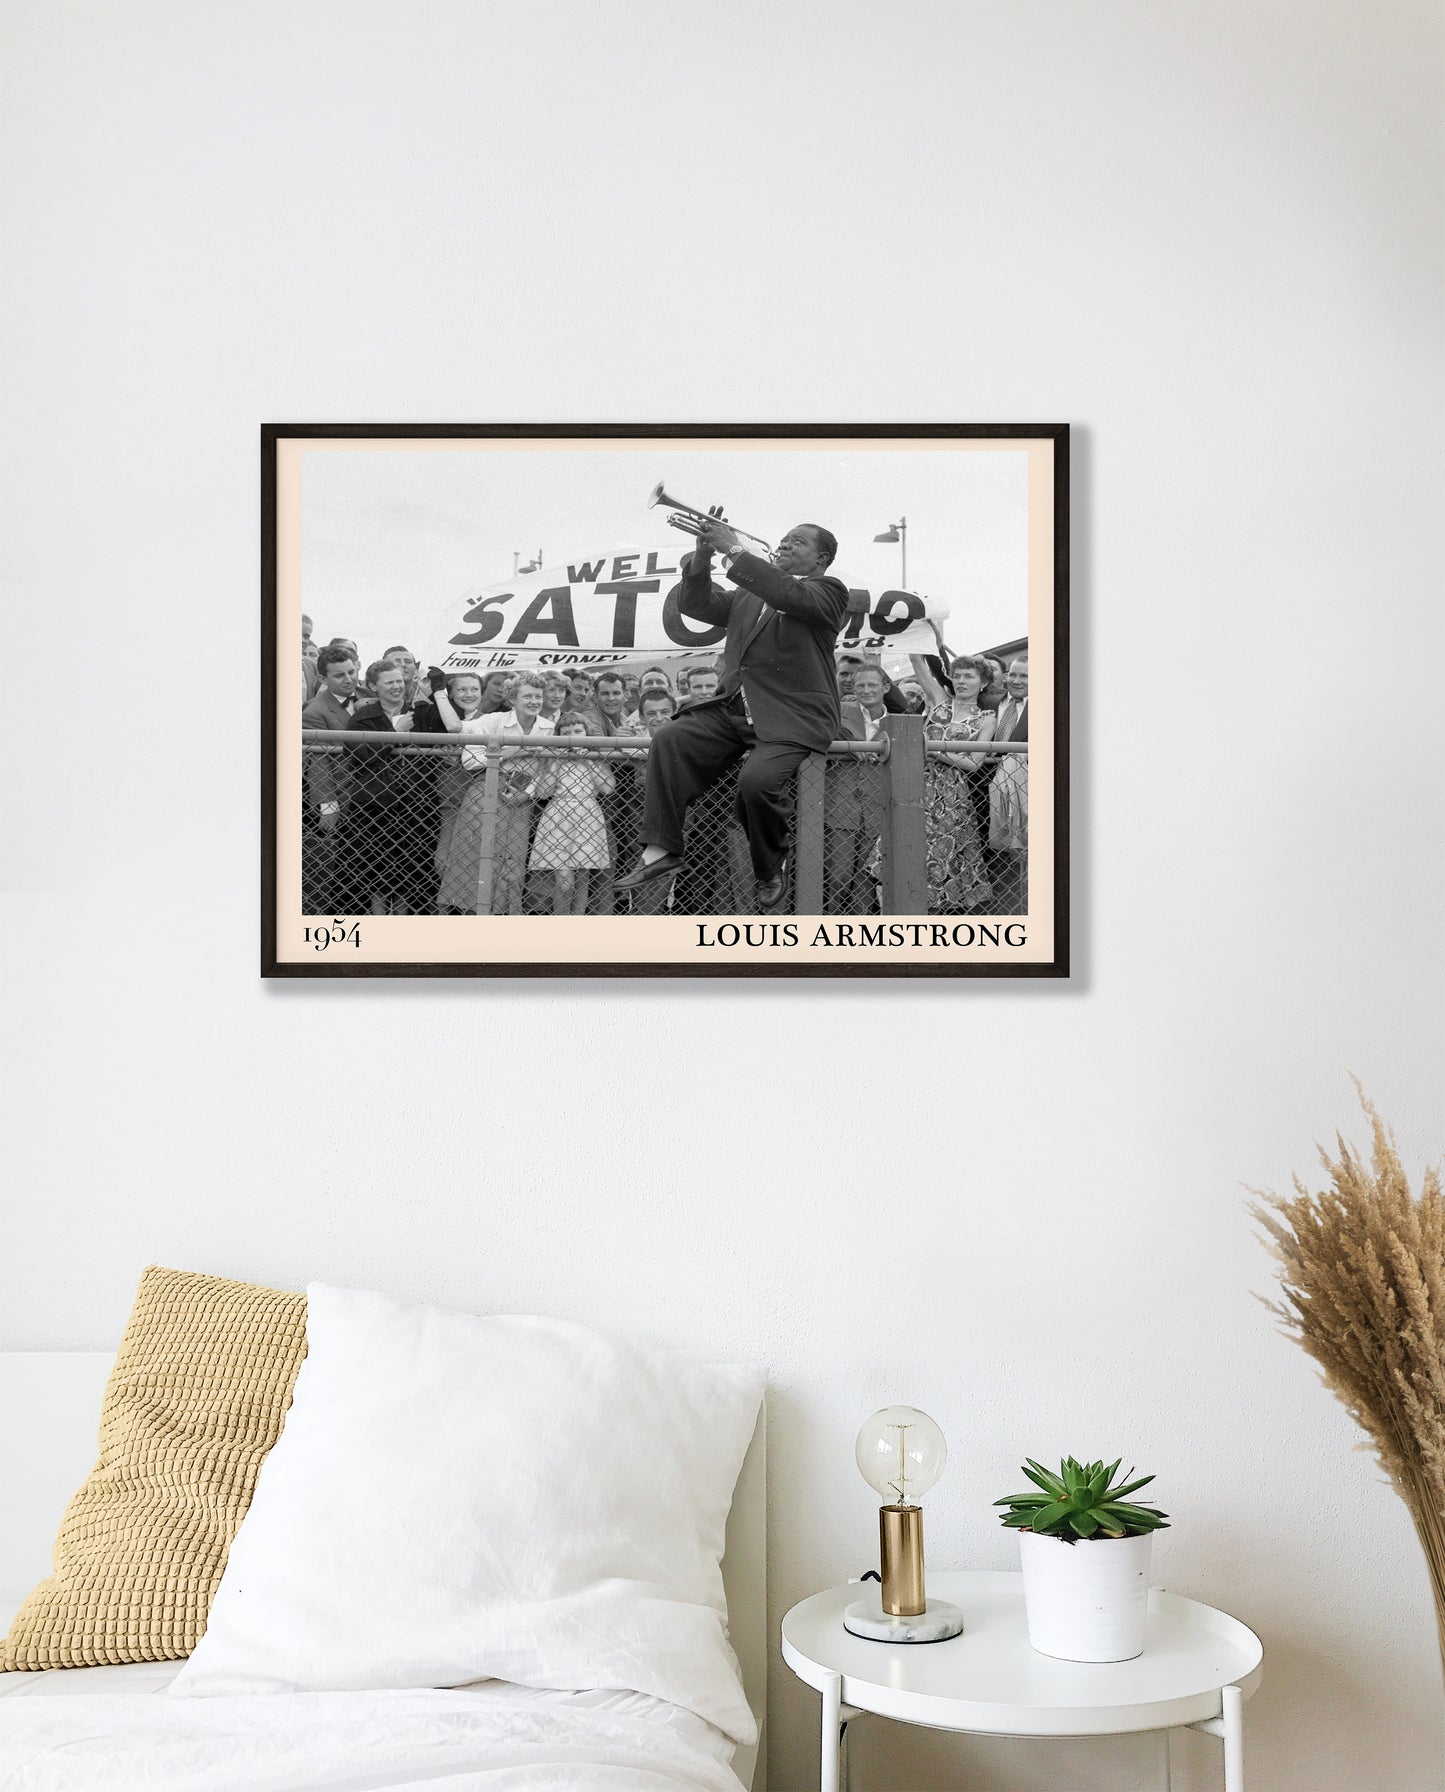 1954 picture of Louis Armstrong playing his trumpet sat on a fence. Picture crafted into a cool black framed music poster, with an off-white border. Poster is hanging on a white bedroom wall